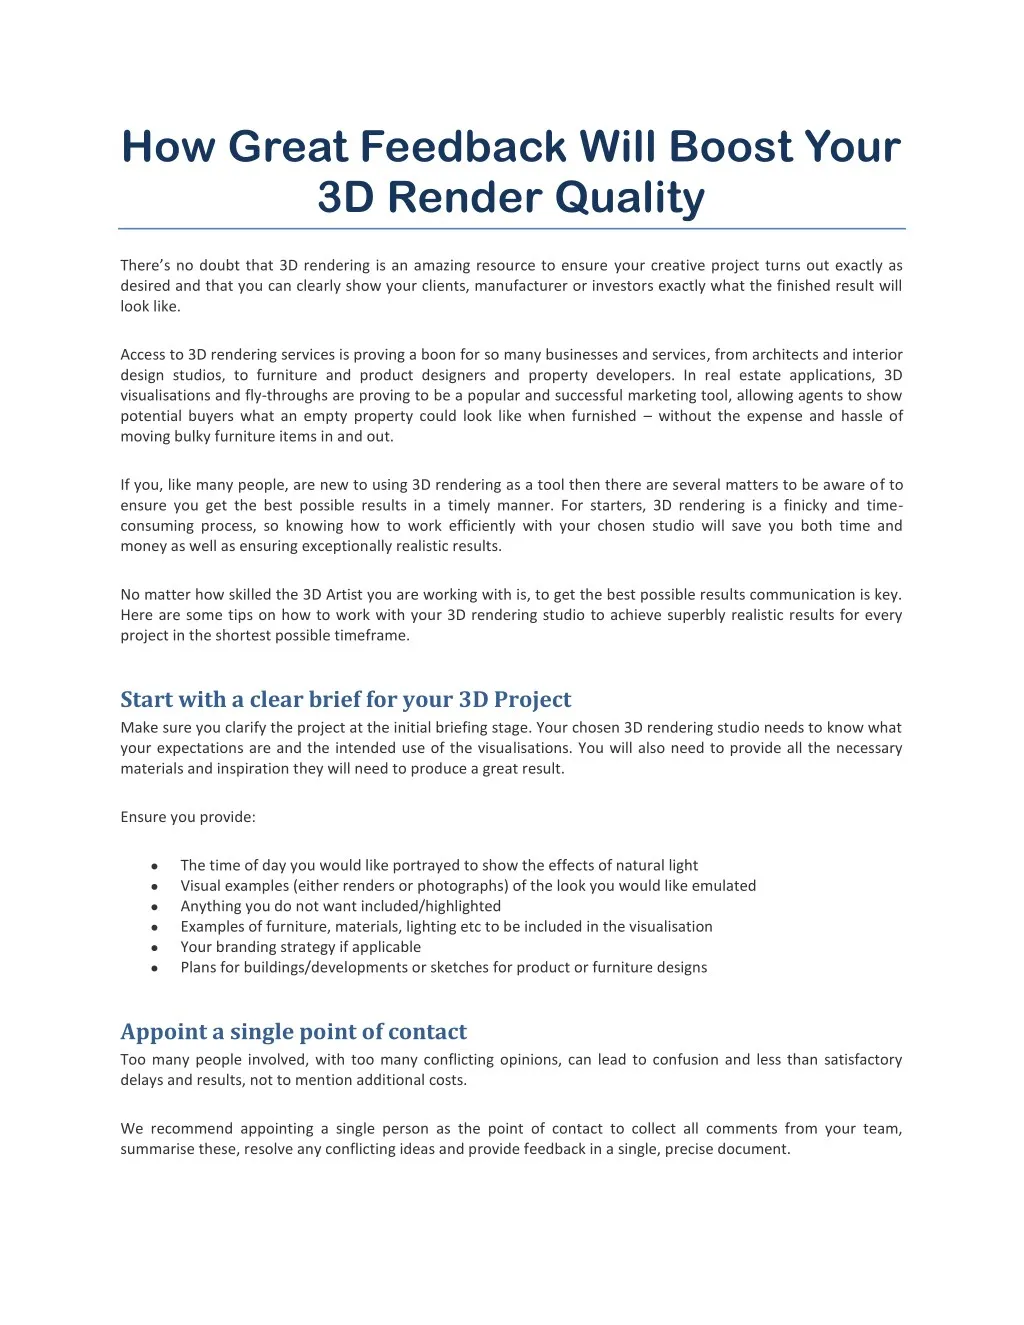 how great feedback will boost your 3d render